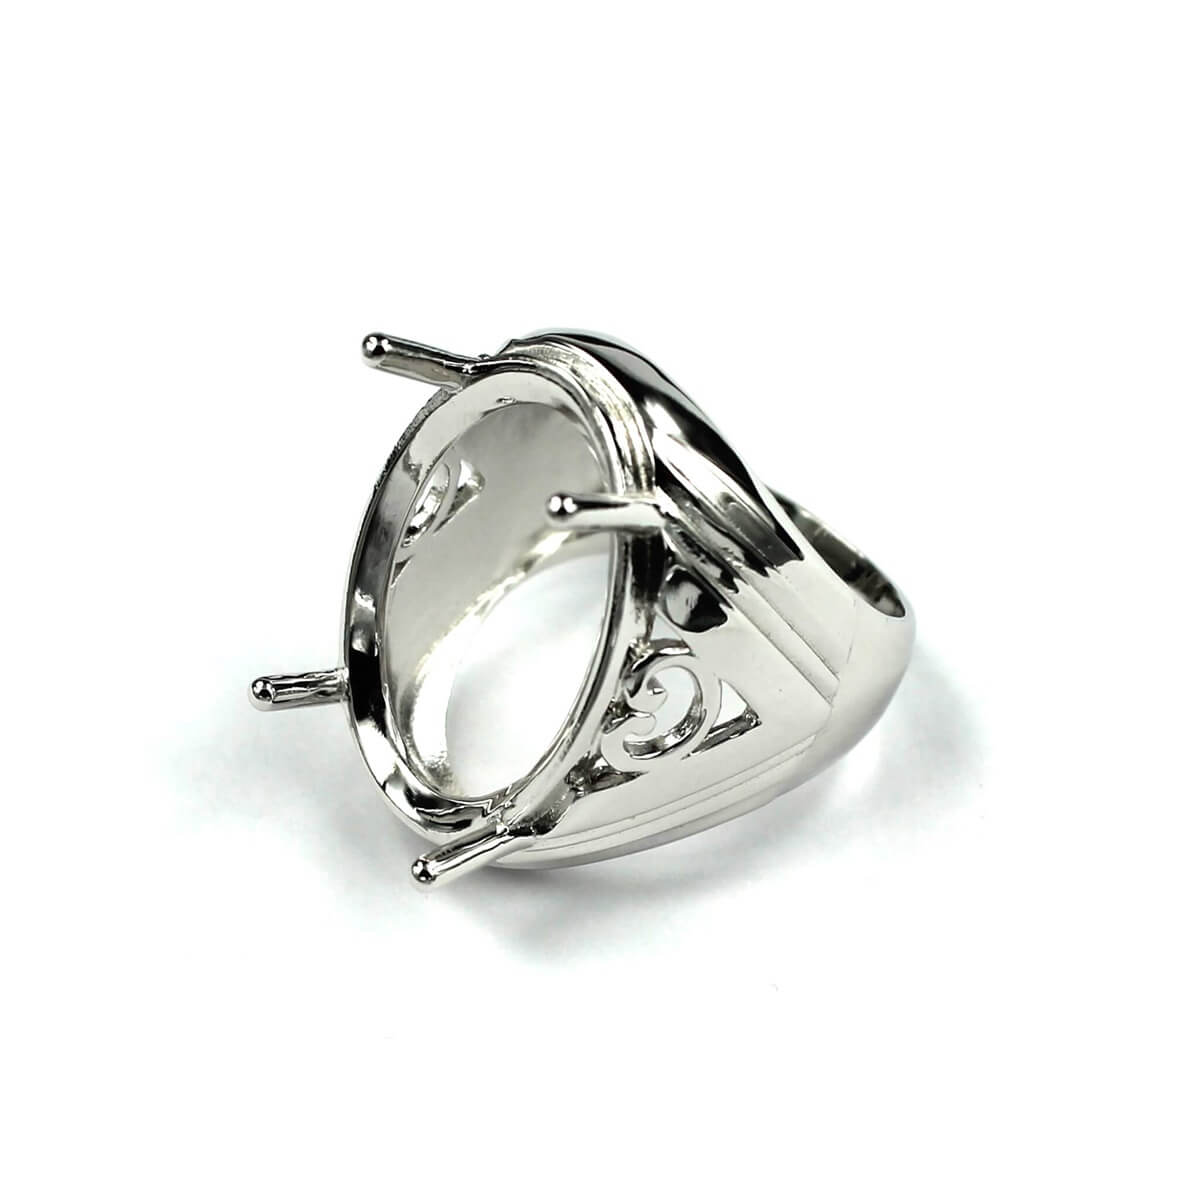 Hollow Patterned Ring with Oval Prongs Mounting in Sterling Silver 